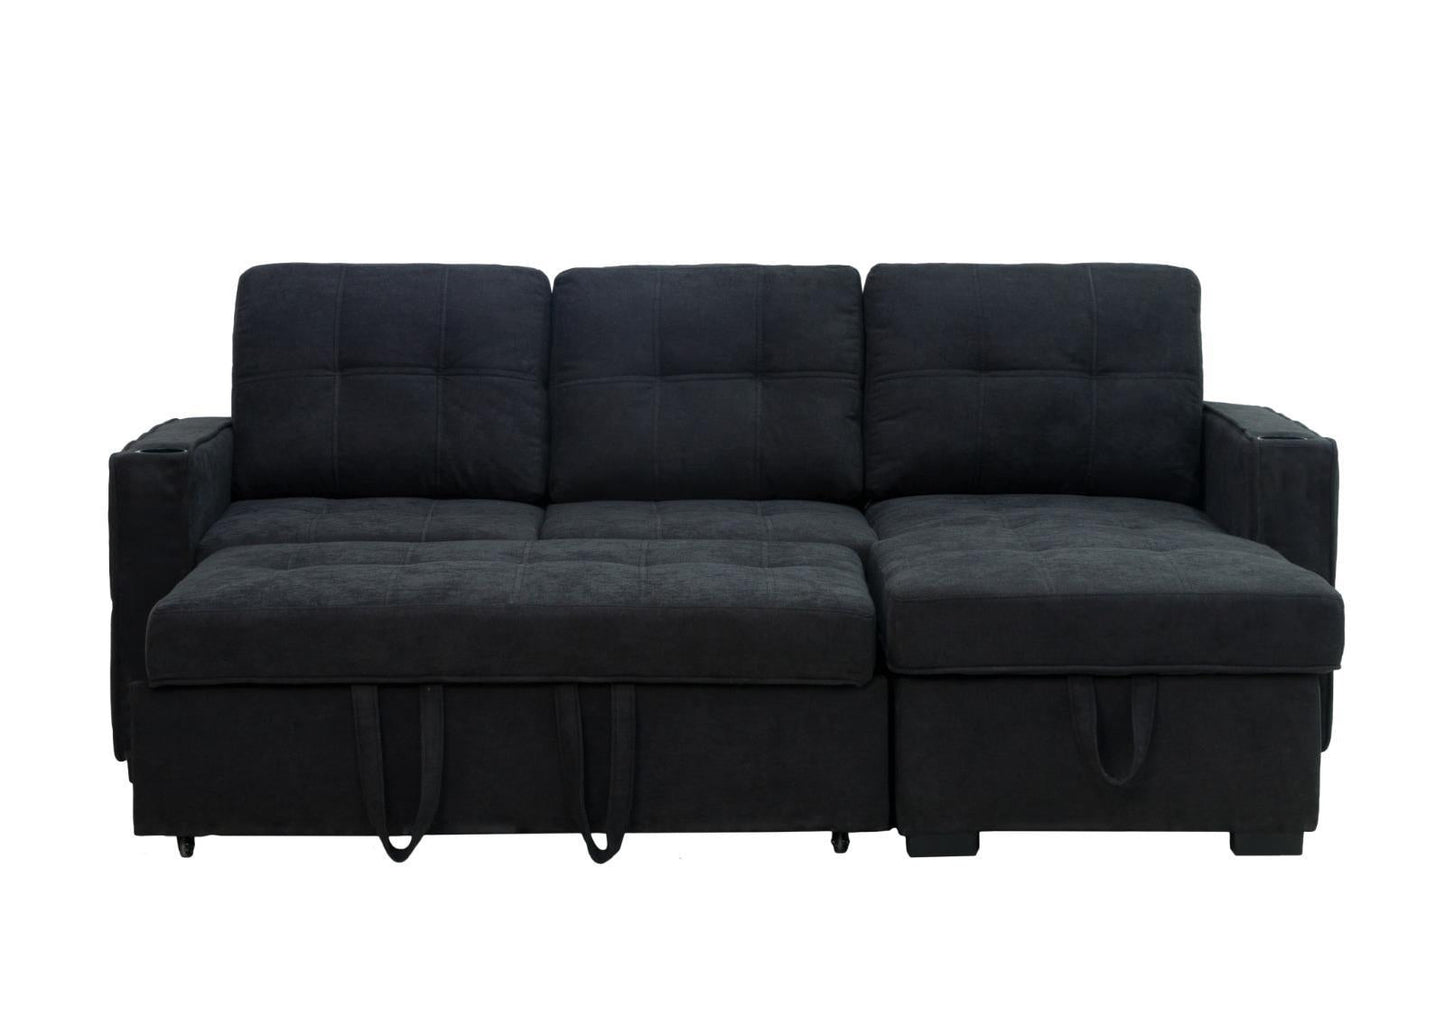 (BALSAM BLACK)- REVERSIBLE- FABRIC SECTIONAL SOFA WITH PULL OUT BED